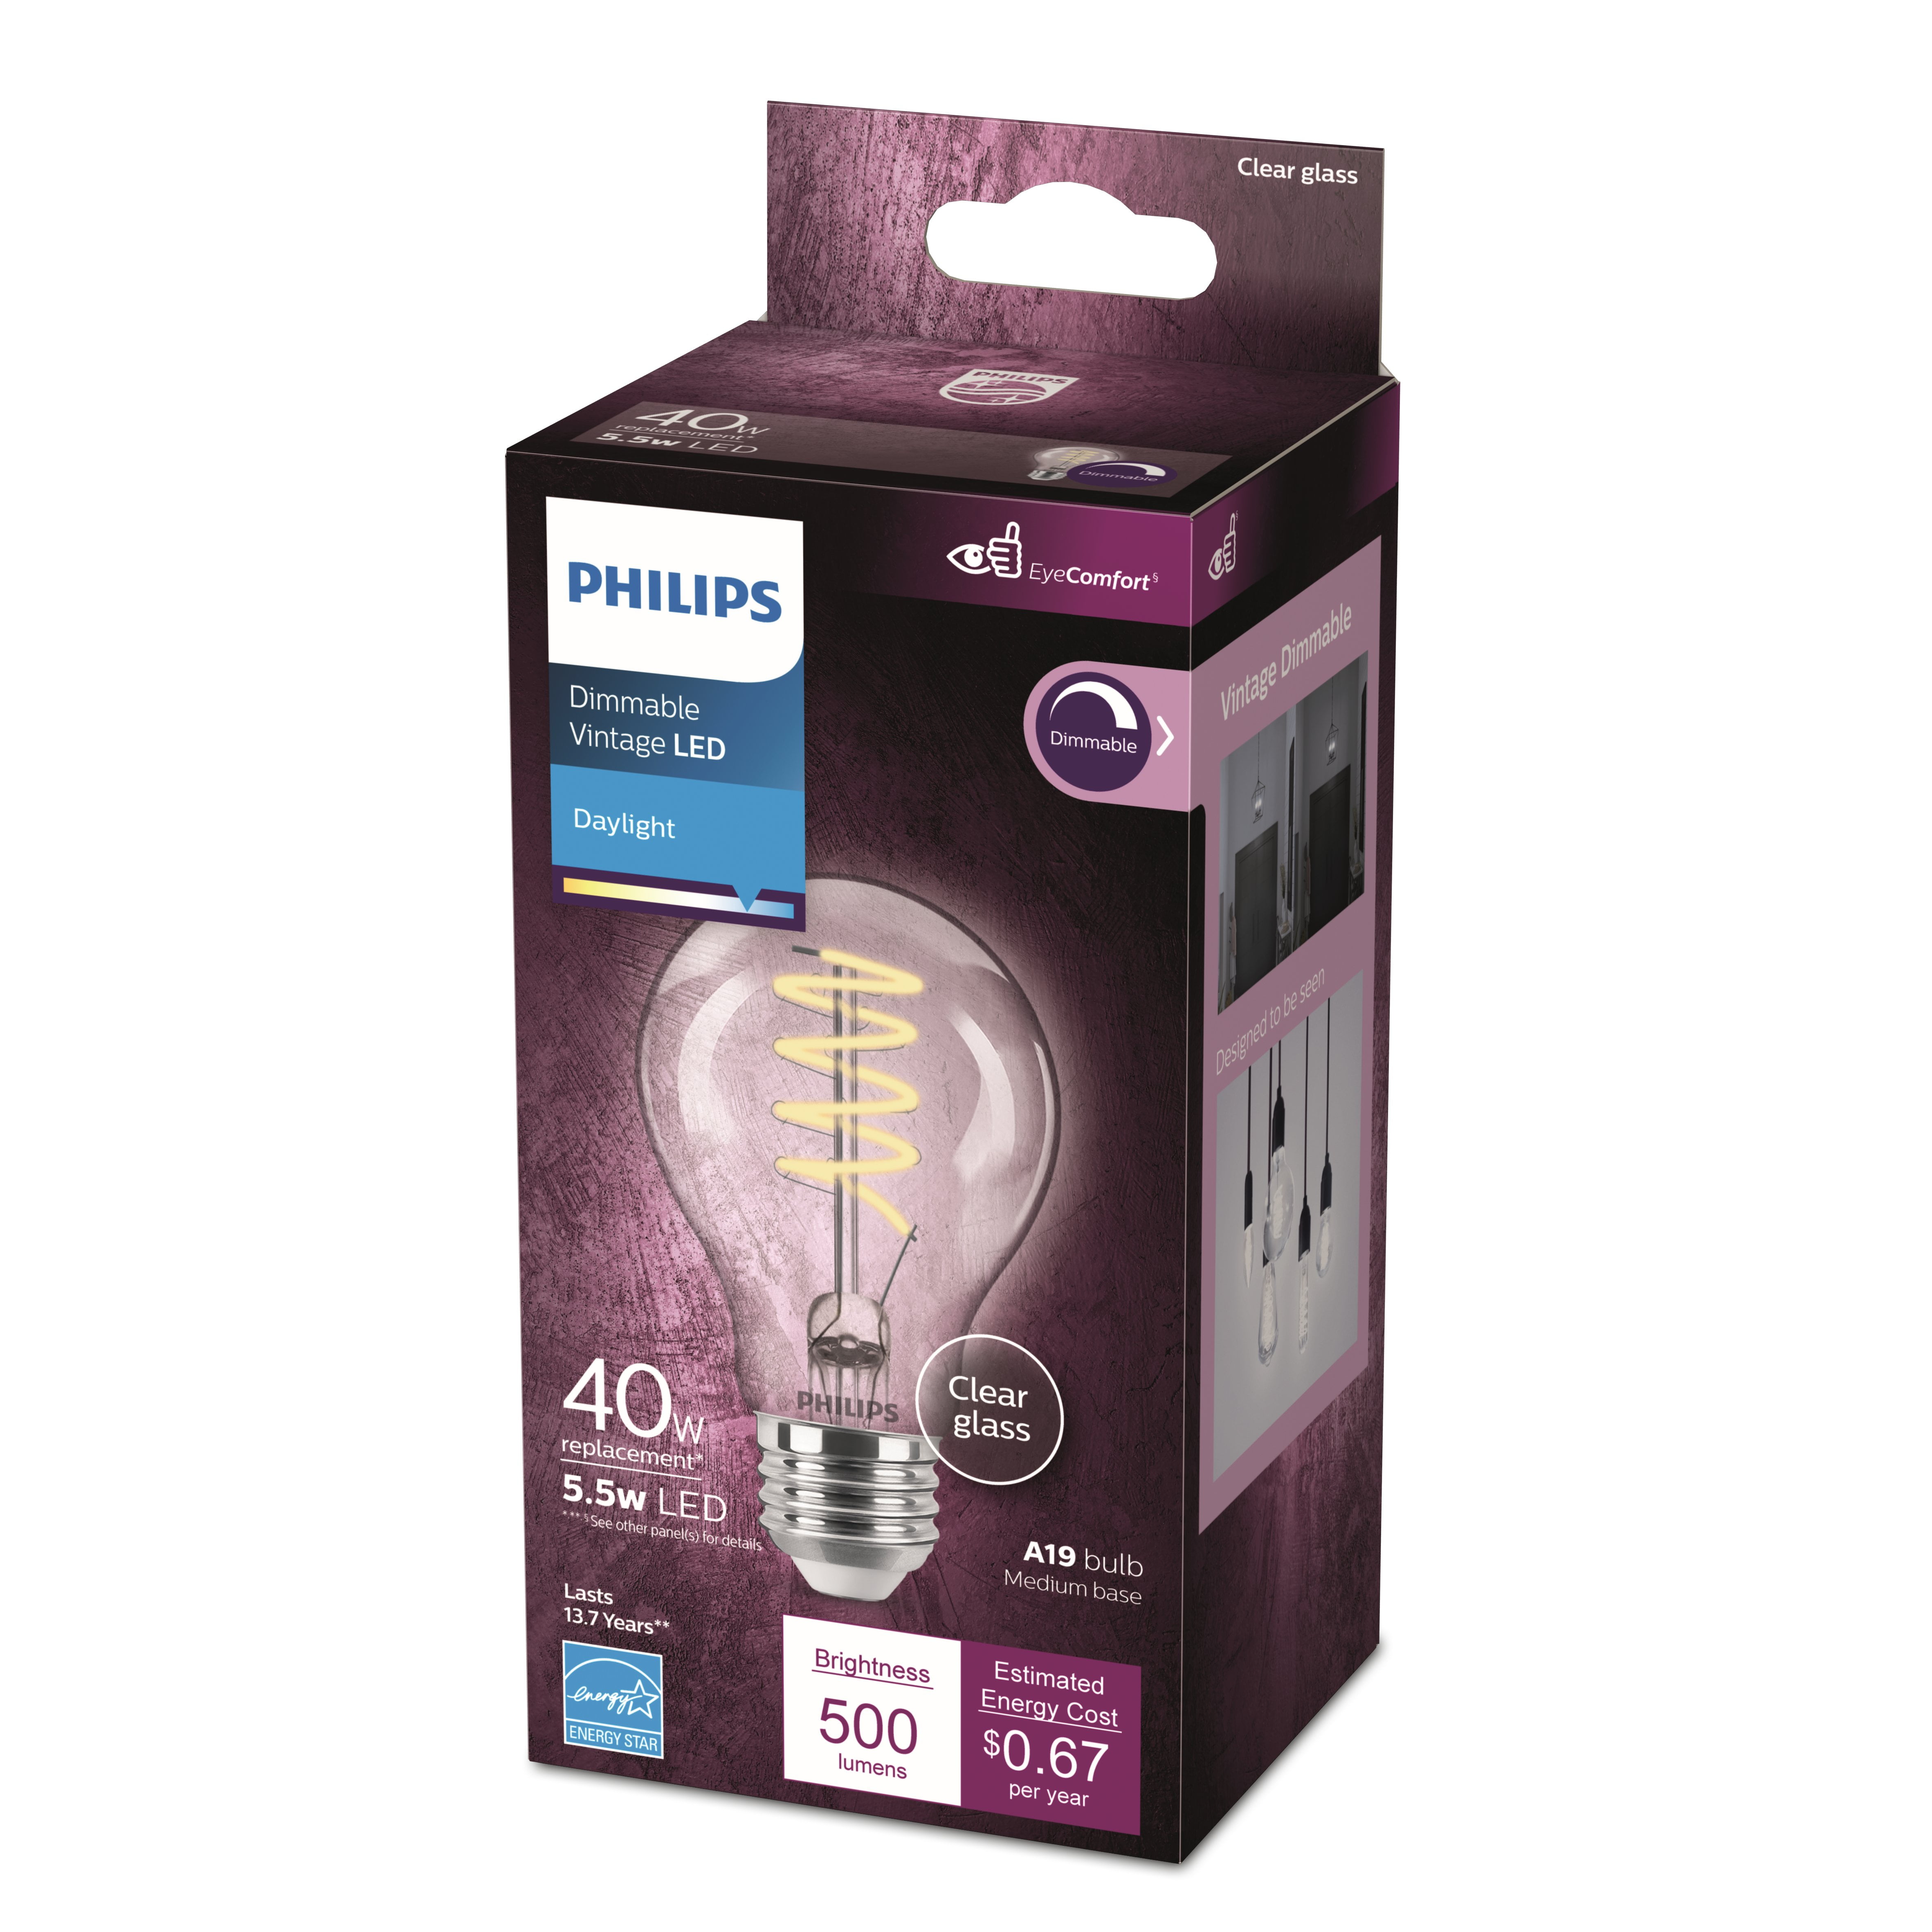 Philips Vintage LED 40-Watts A19 Clear Spiral Filament Light Bulb